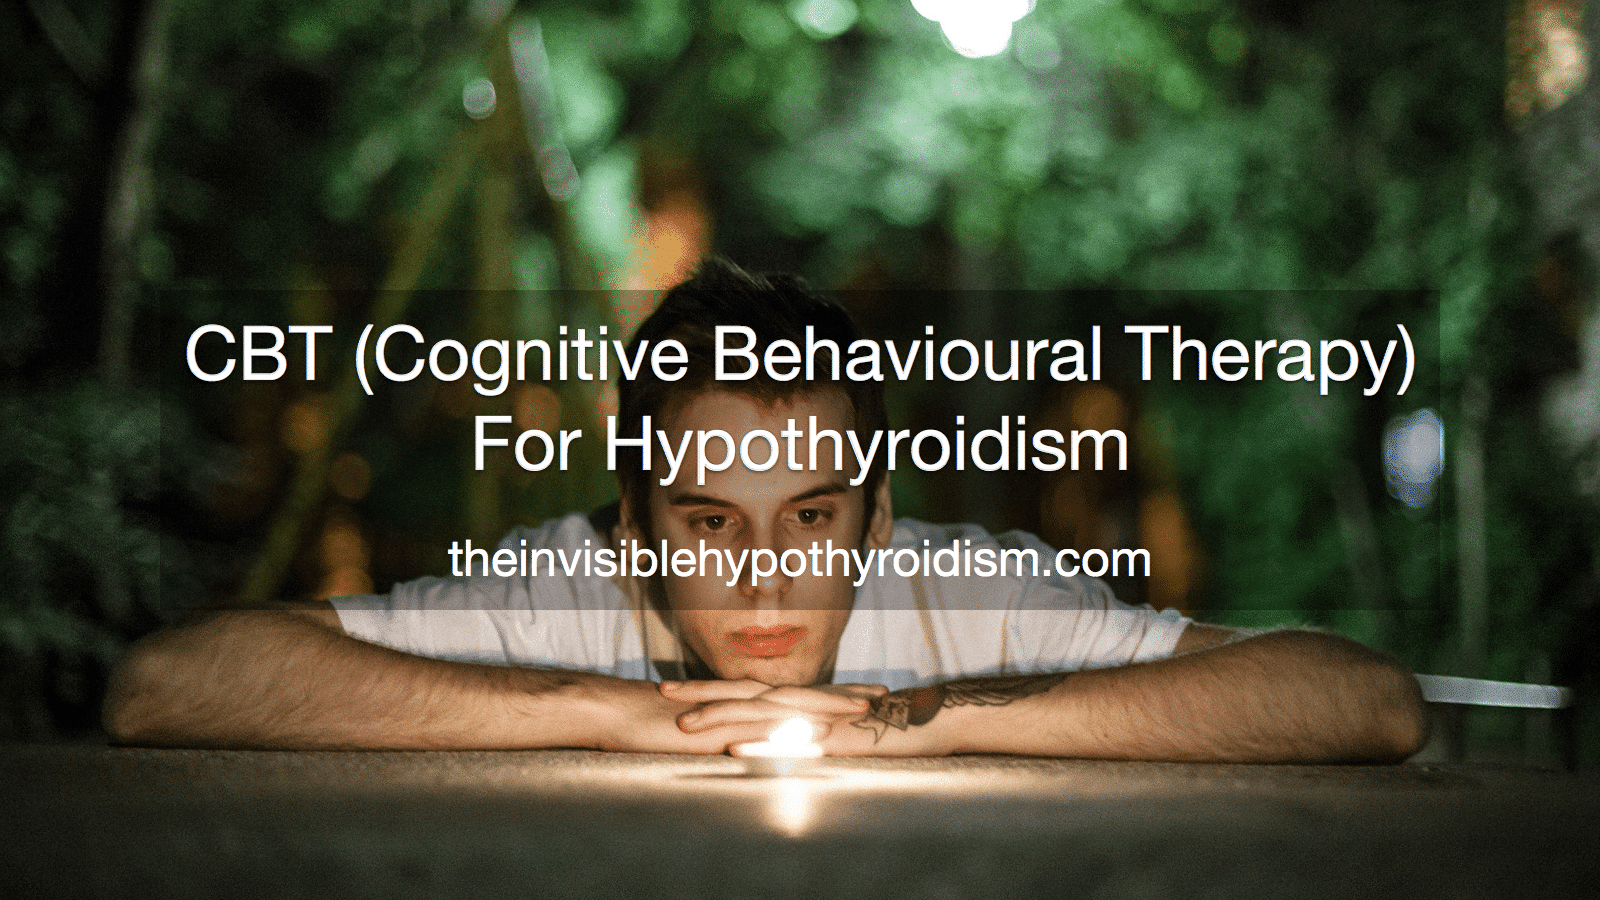 CBT (Cognitive Behavioural Therapy) For Hypothyroidism